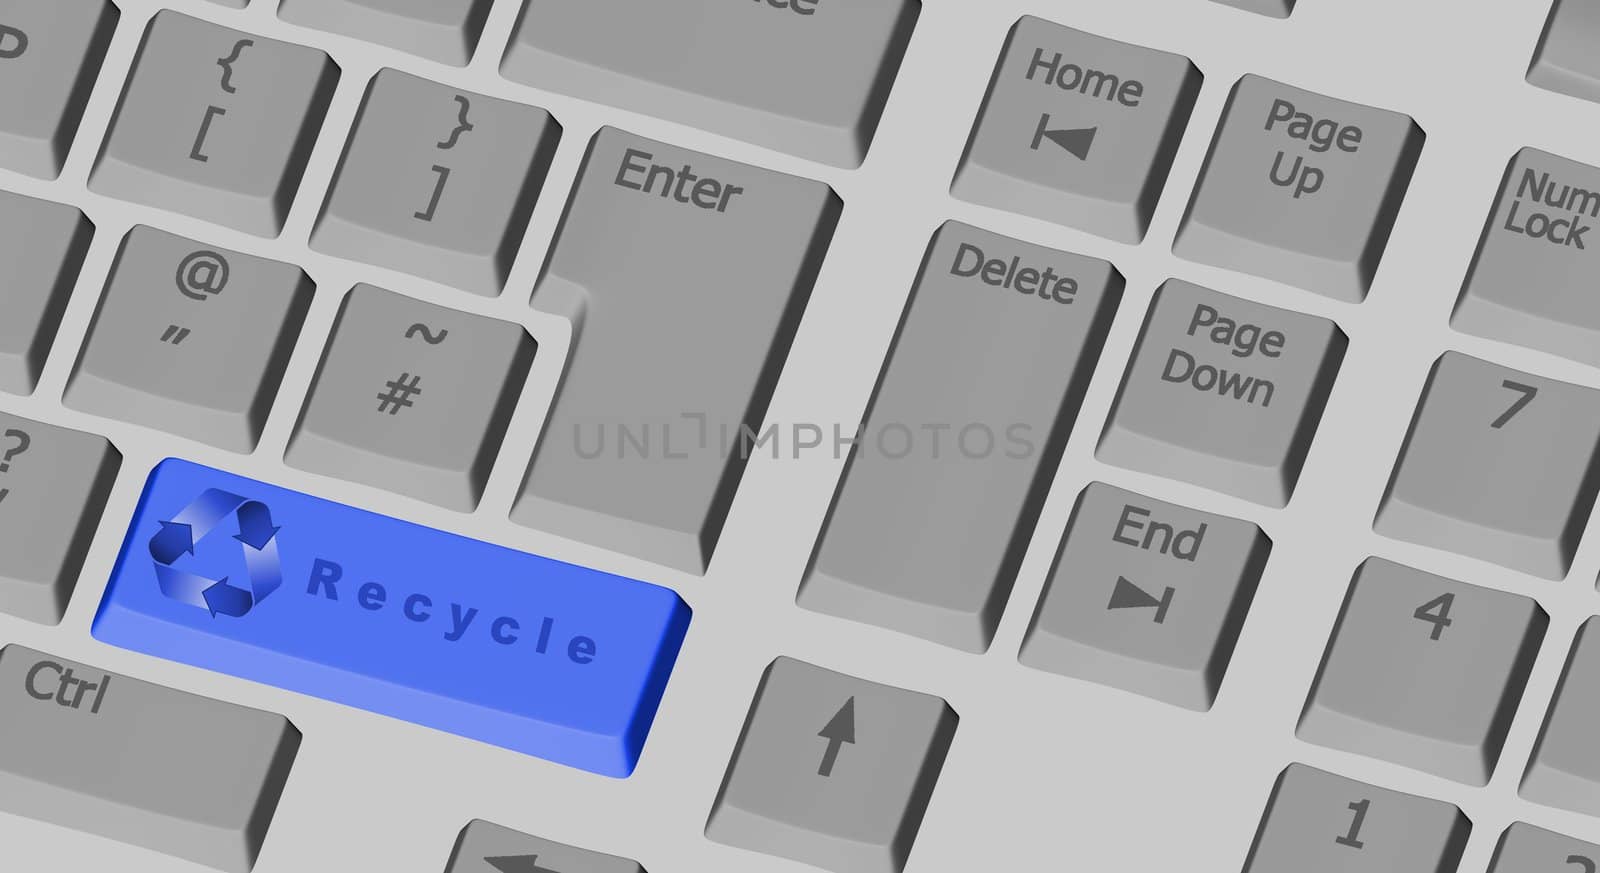 Recycle symbol on the computer keyboard with special key in blue